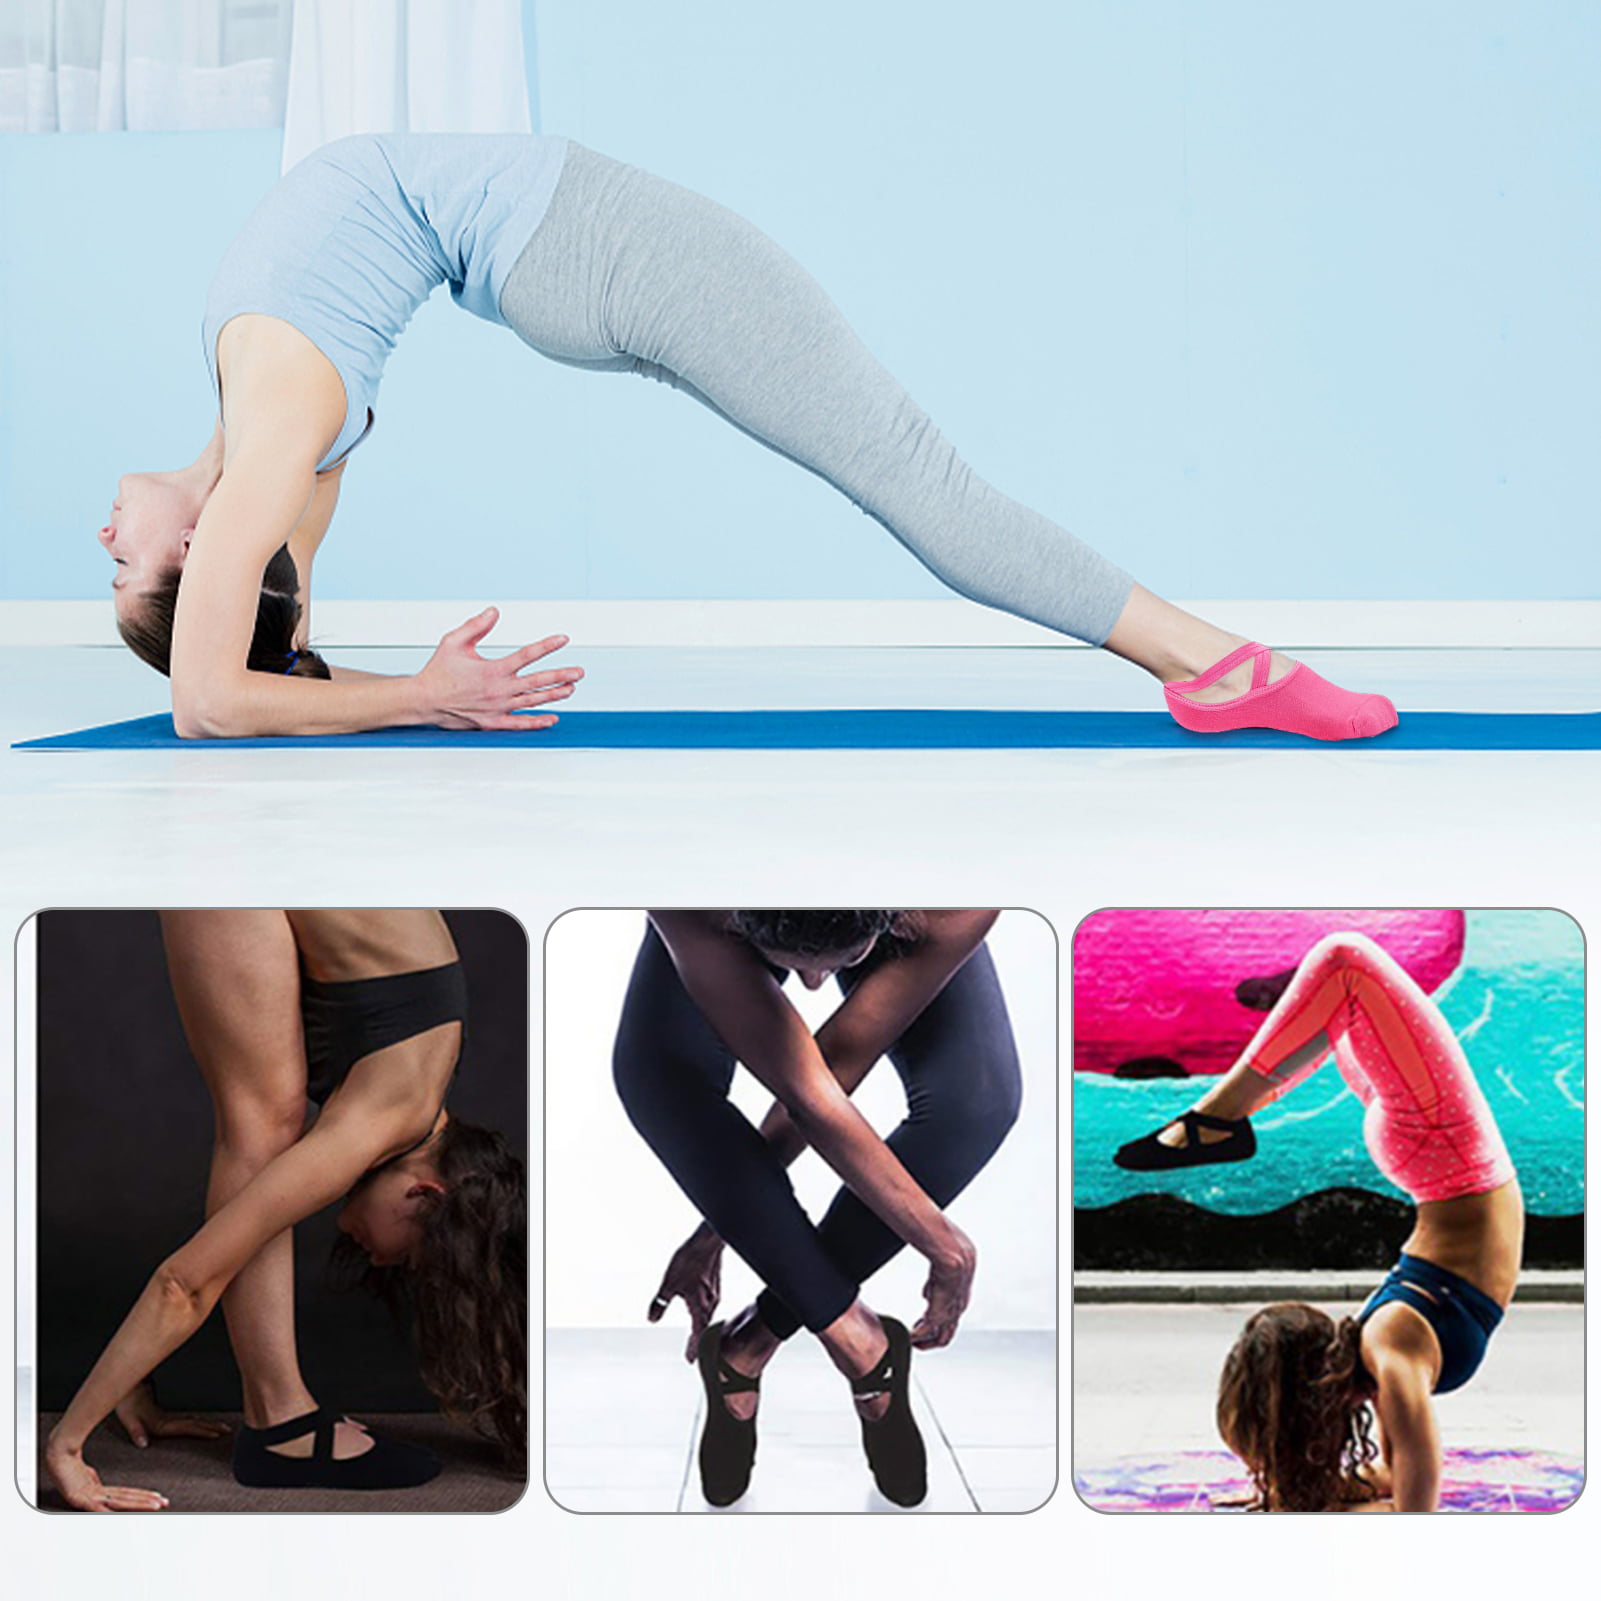 Breathable Backless Peep Toe Toe Separator Socks For Women And Girls Ideal  For Fitness, Gym, Pilate, Dance, Ballet Silicone, Skidproof, And Floor  Trampoline Ready With Grip From Dandankang, $1.52